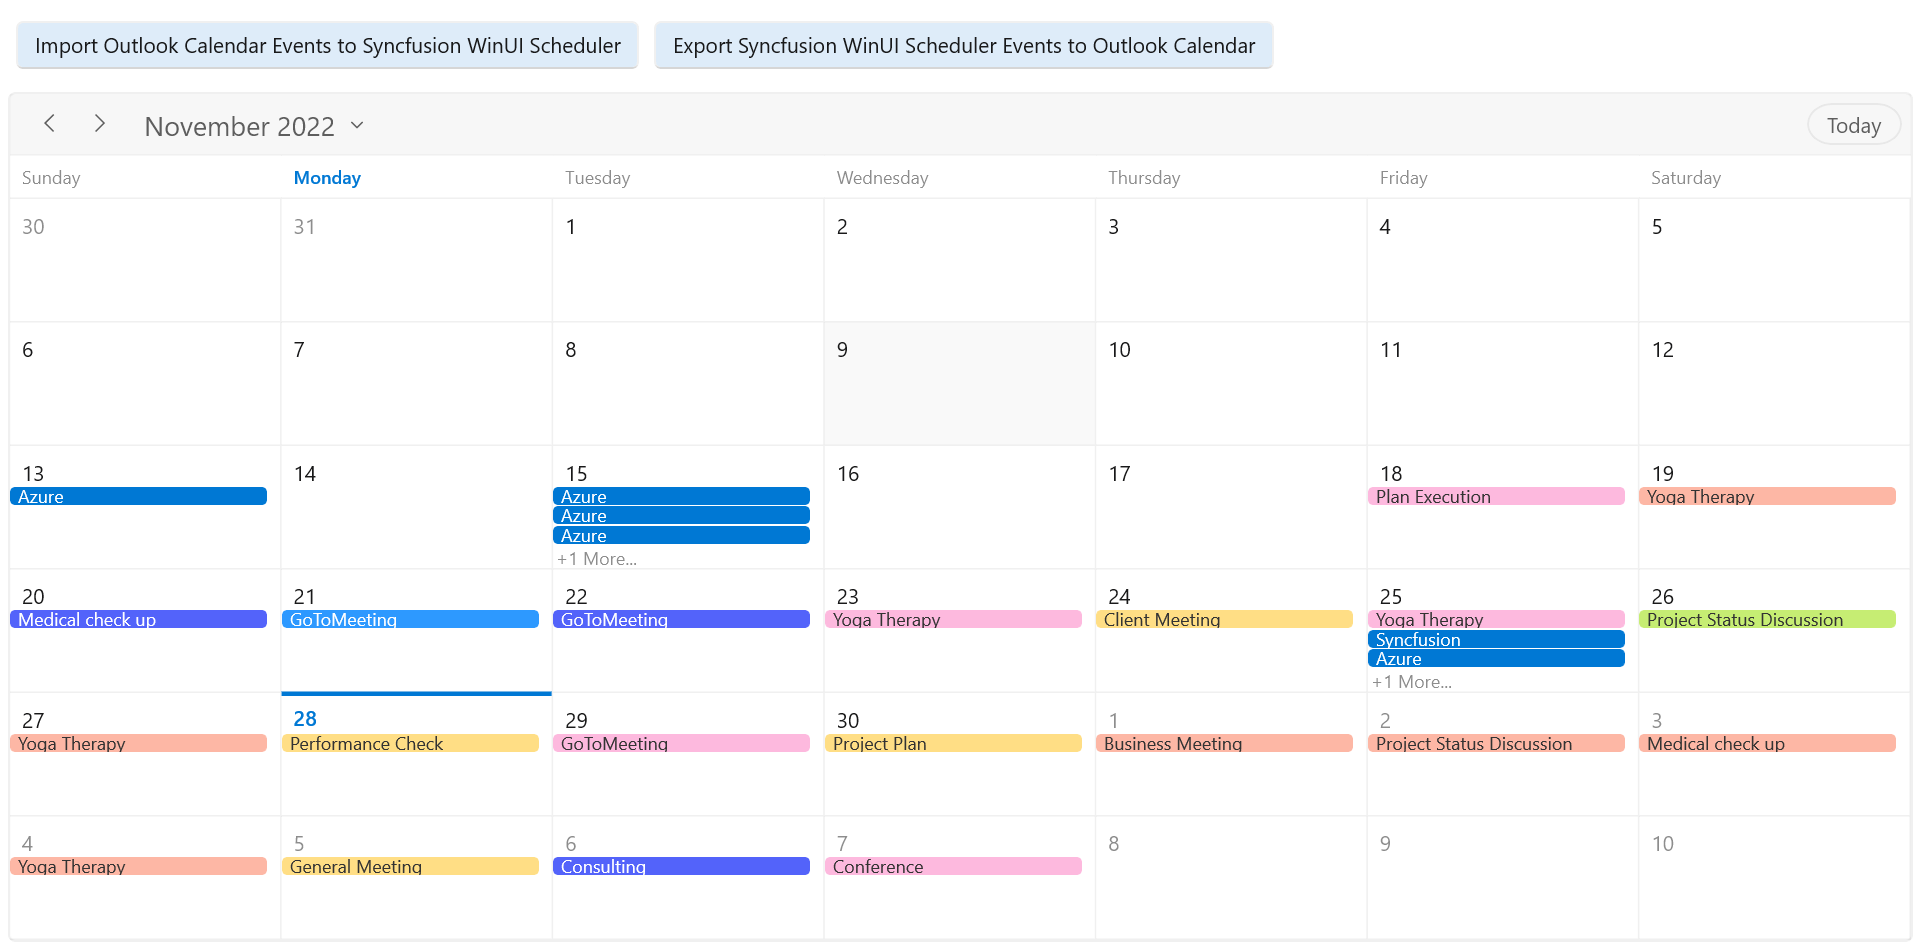 Events Imported from Outlook Calendar